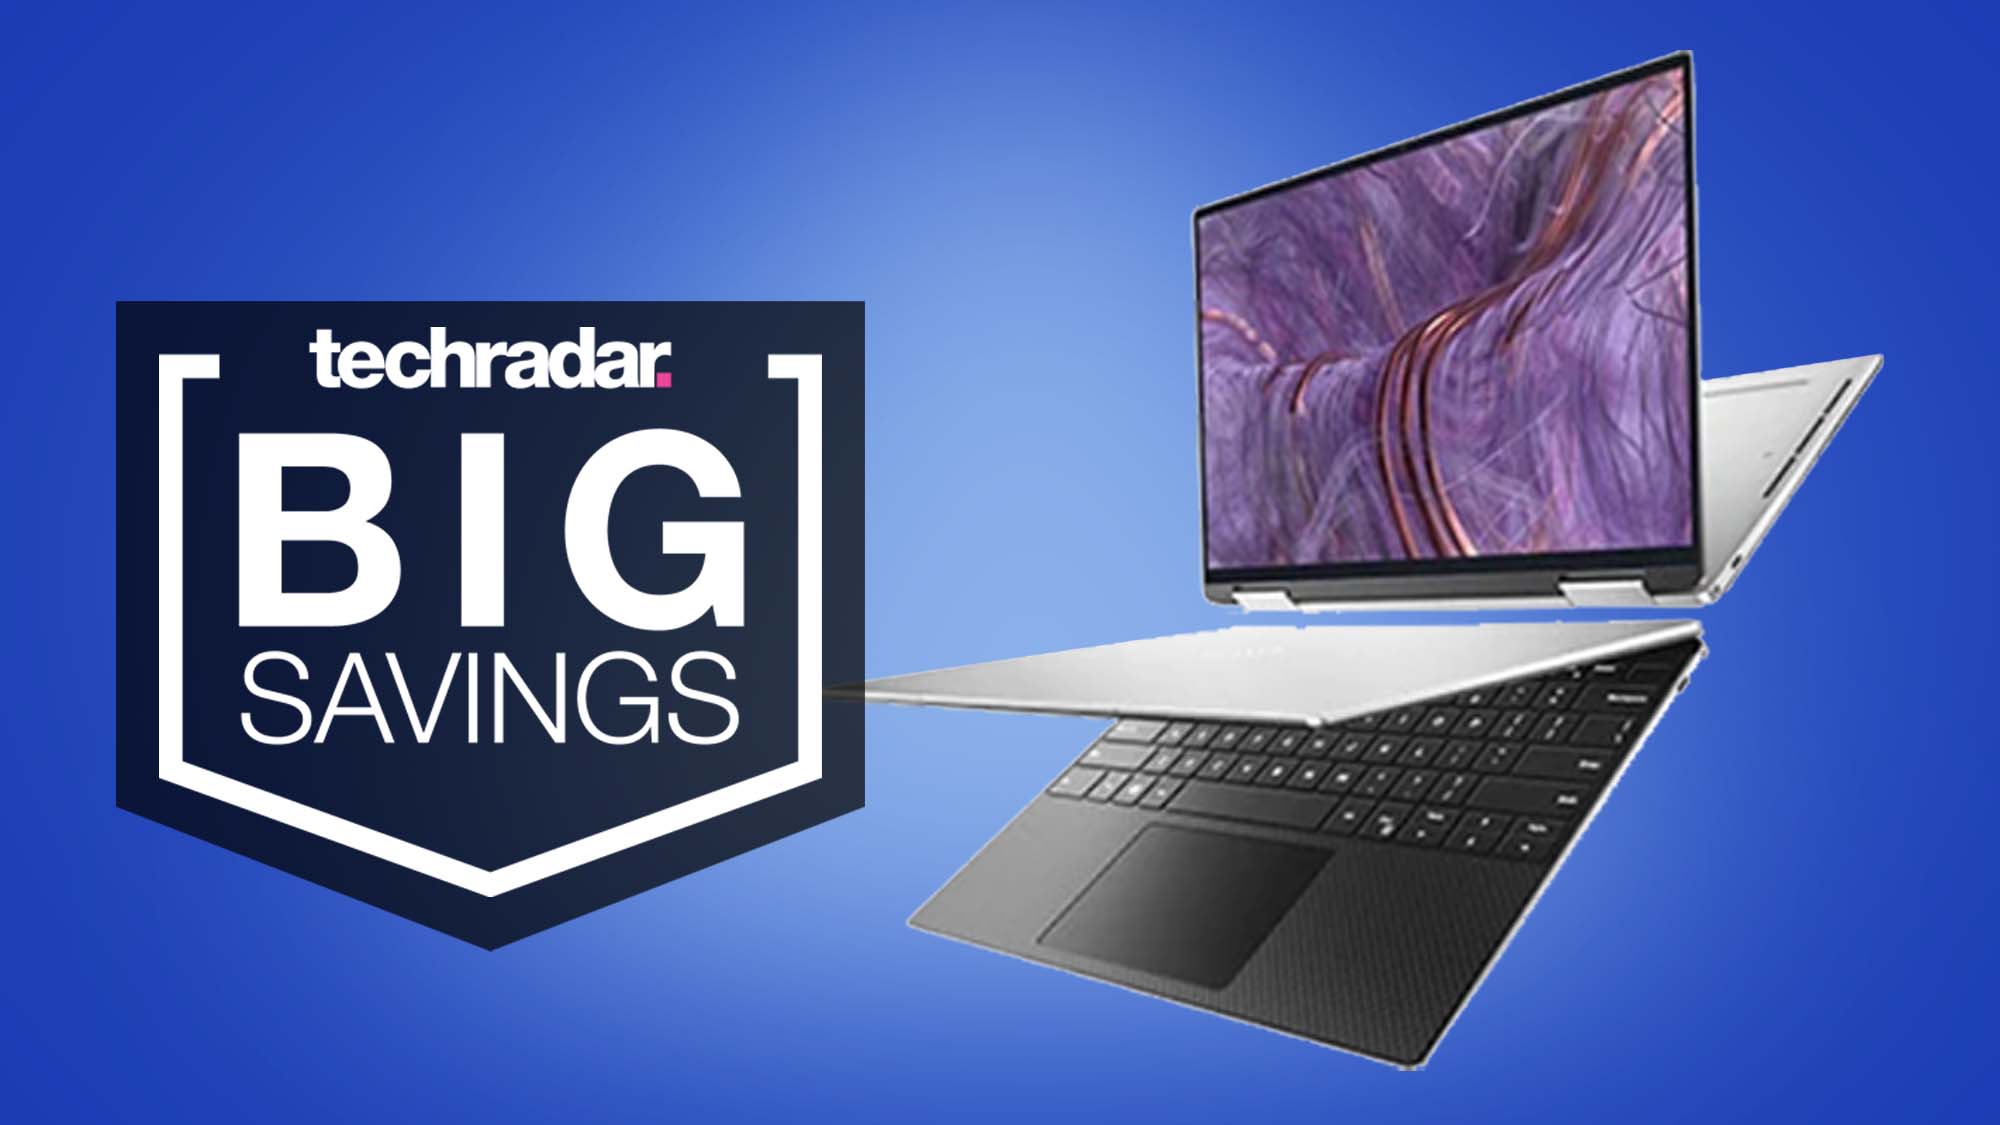 A pair of Dell XPS 13 2-in-1 laptops against a Blue background with a TechRadar Big Savings badge